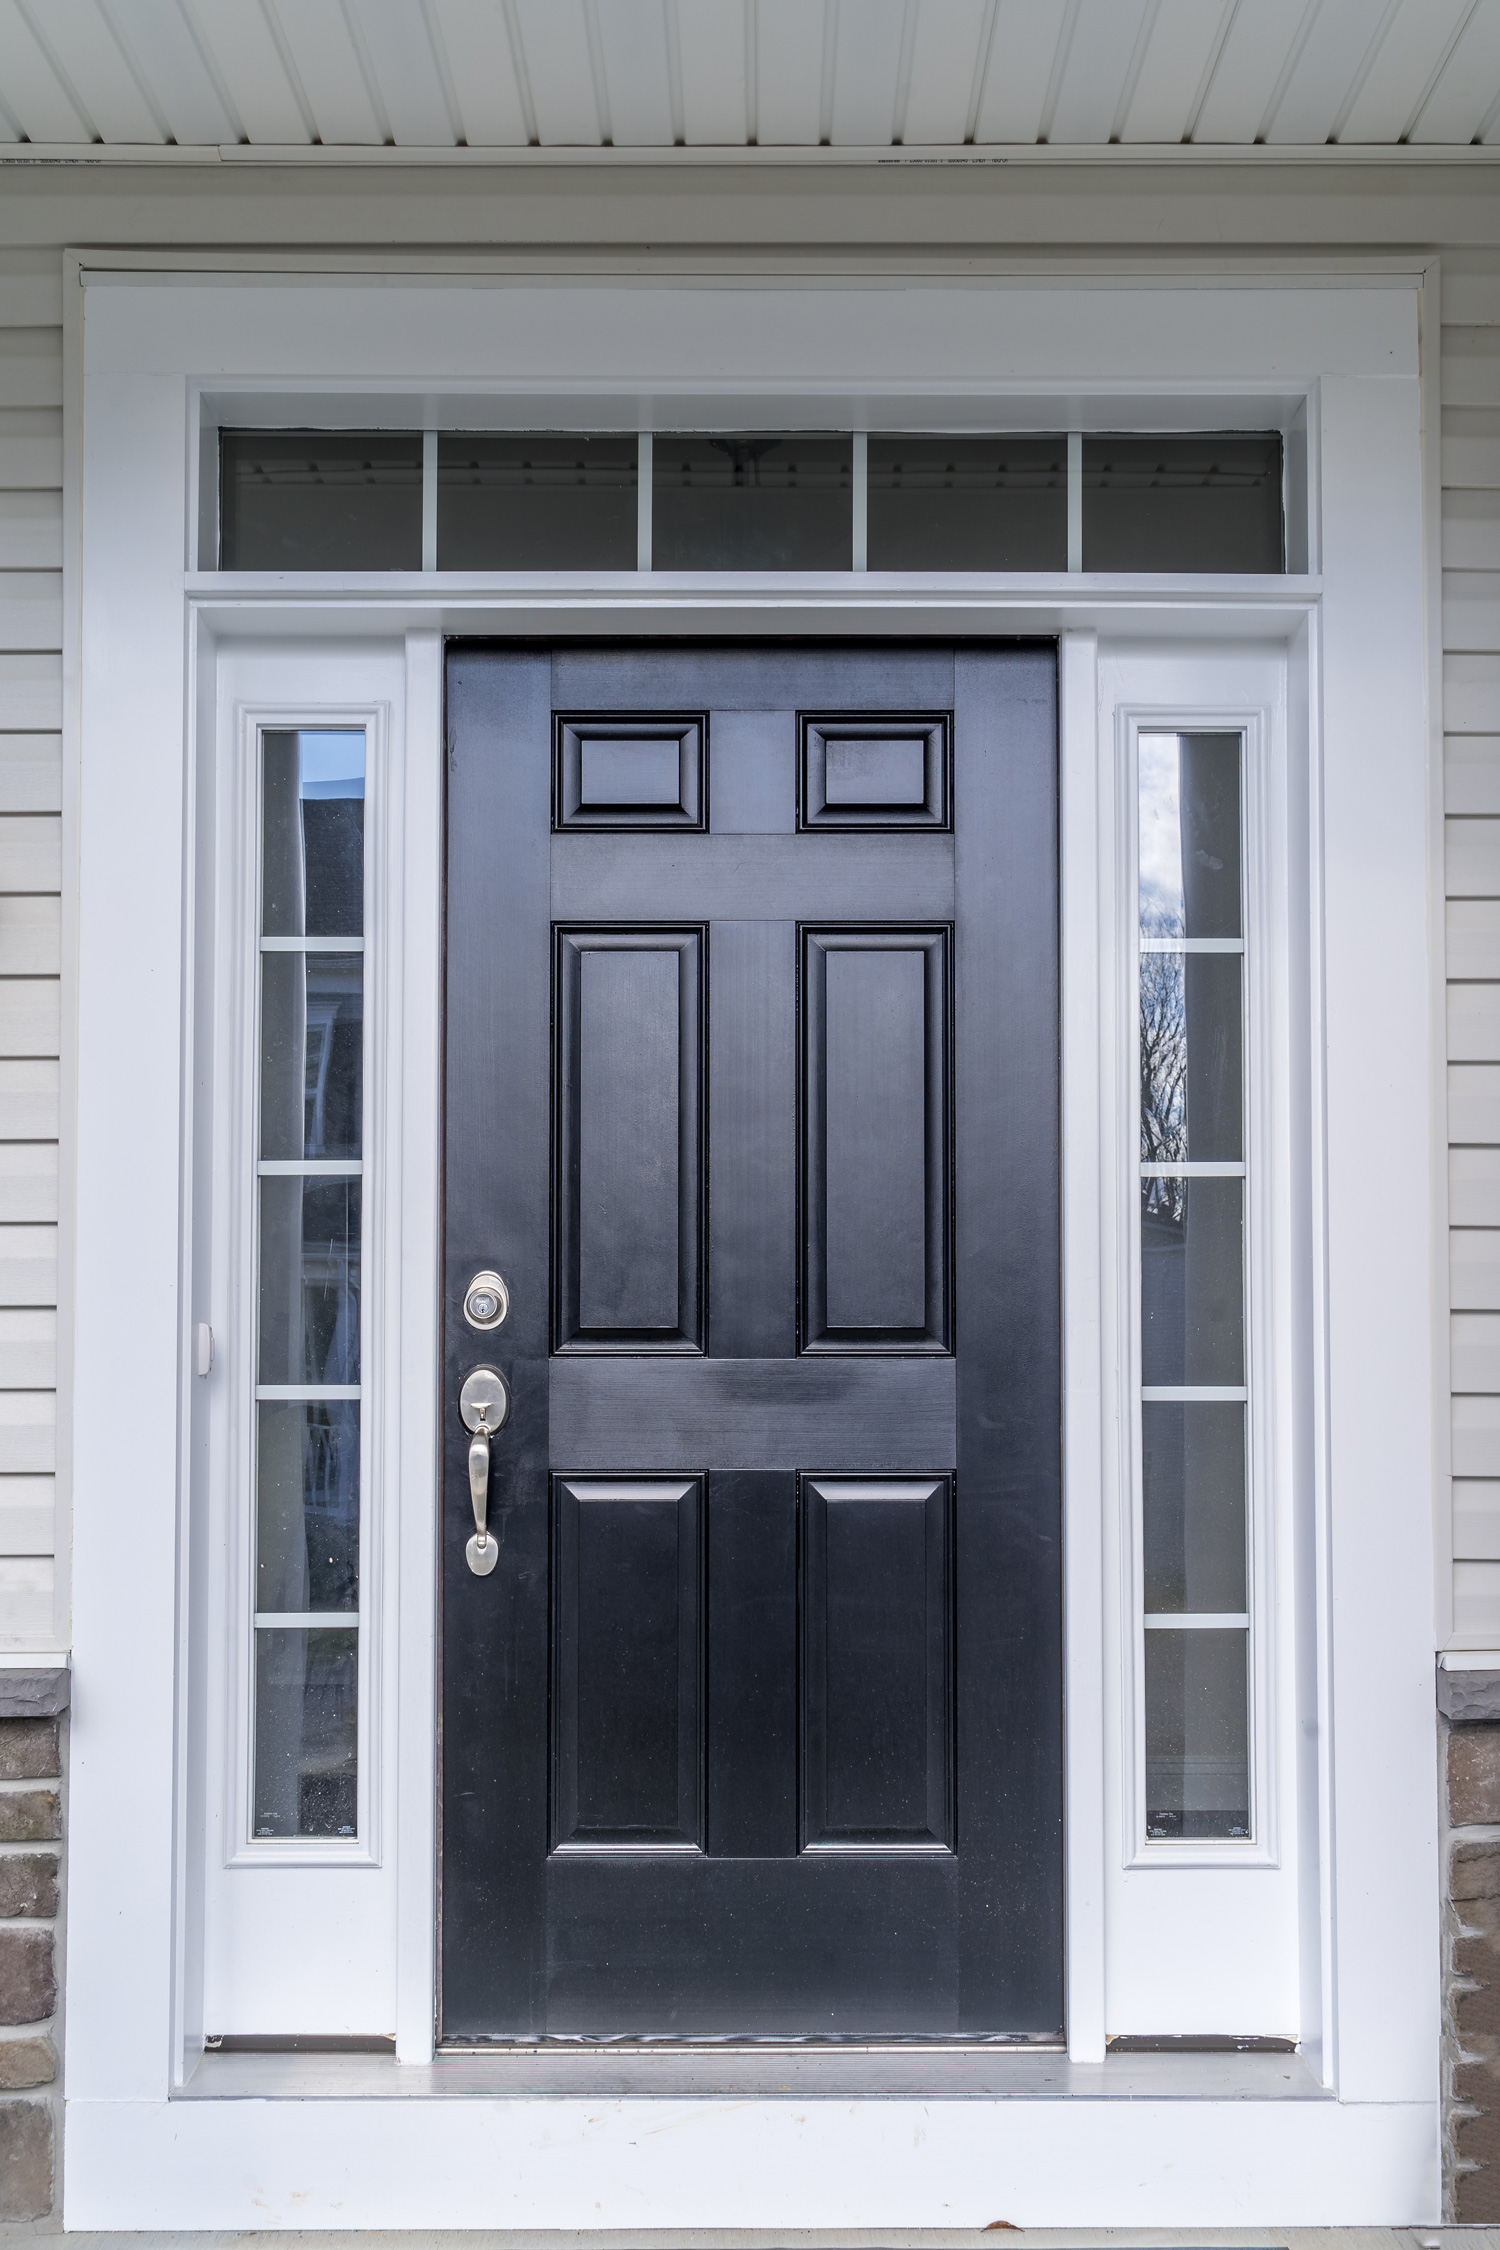 Classic fiberglass prehung black front door, raised panels, white frame, sill, jamb separating the divided sidelights, transom windows separated by narrow white grilles